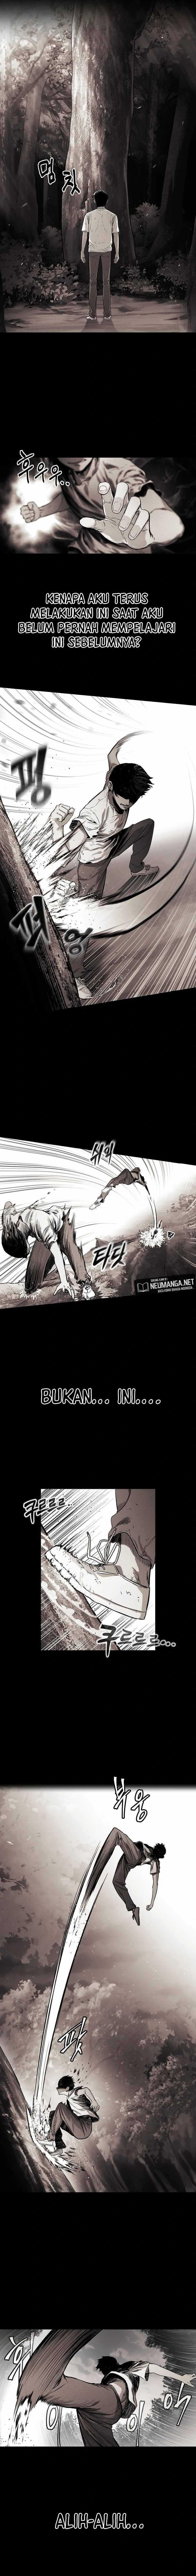 The Invincible Man Chapter 01